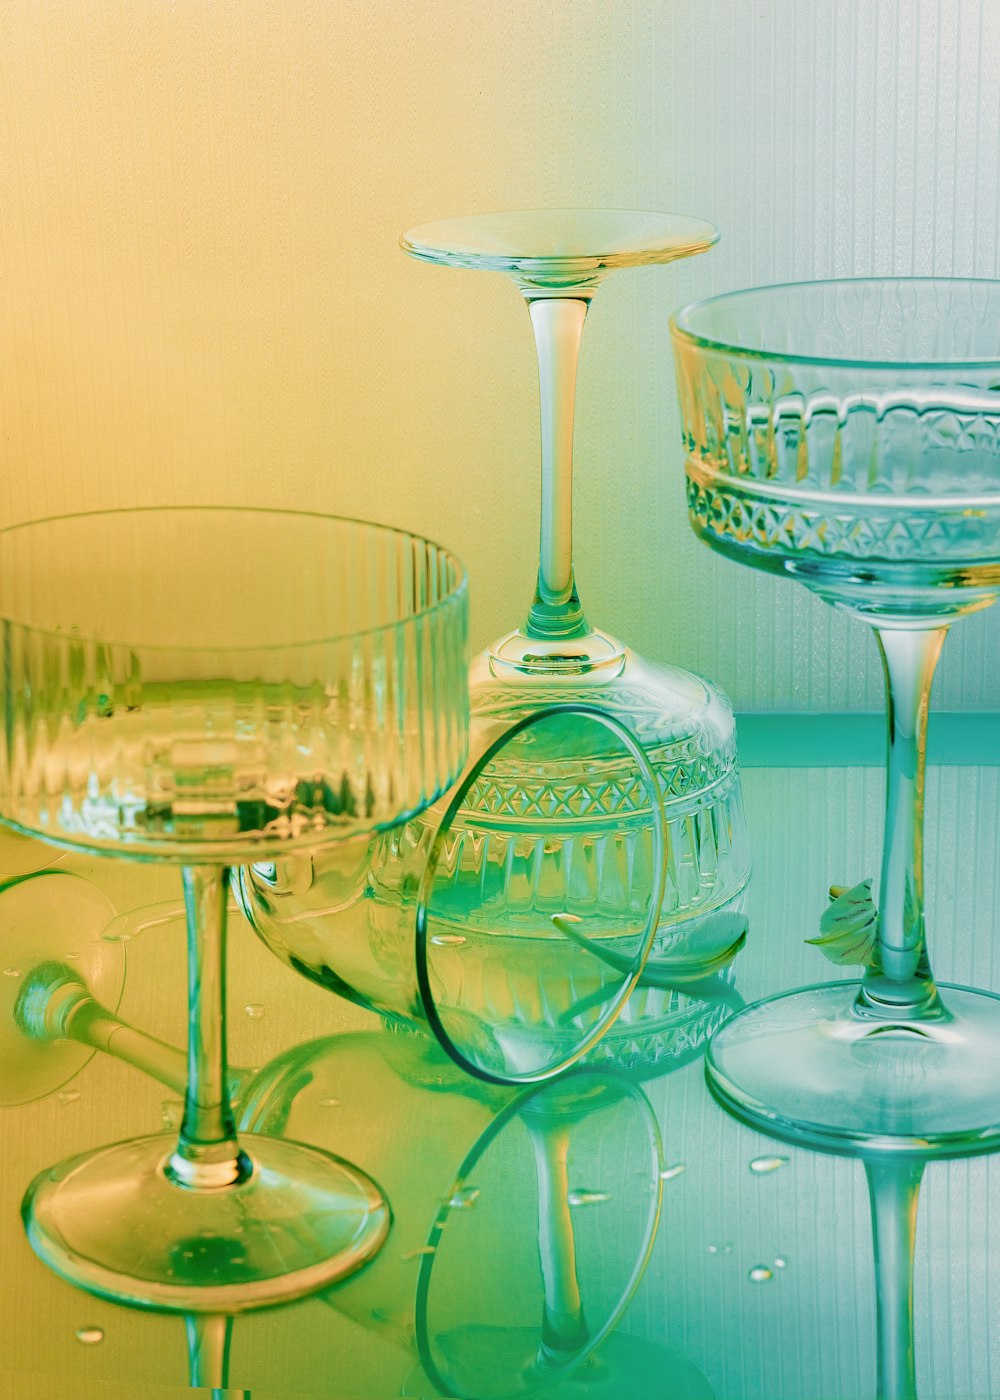 three wine glasses and a wine glass on a table